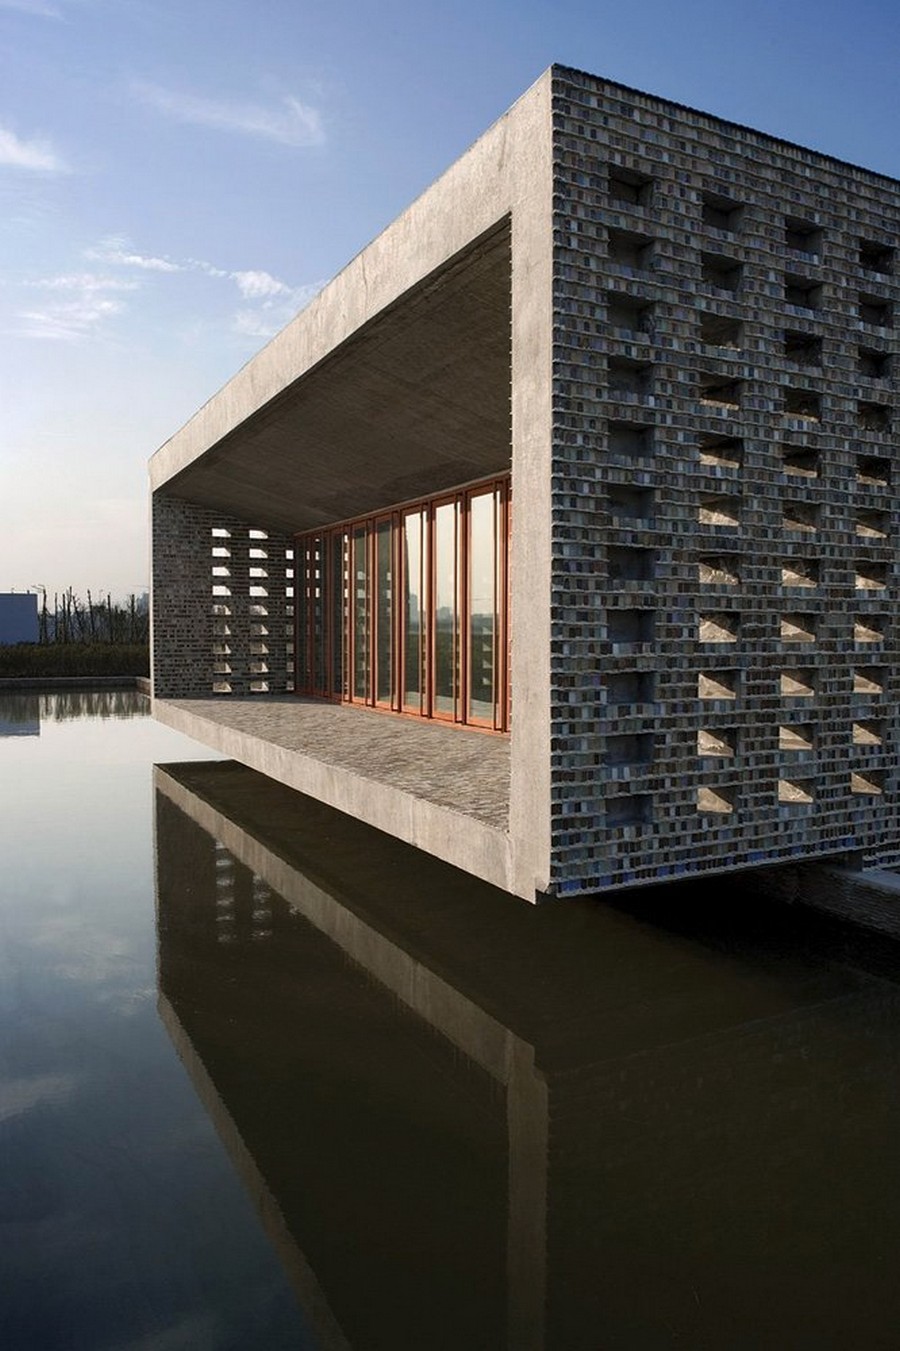 Wang Shu Is One Of China's Biggest Modern Architecture Symbols